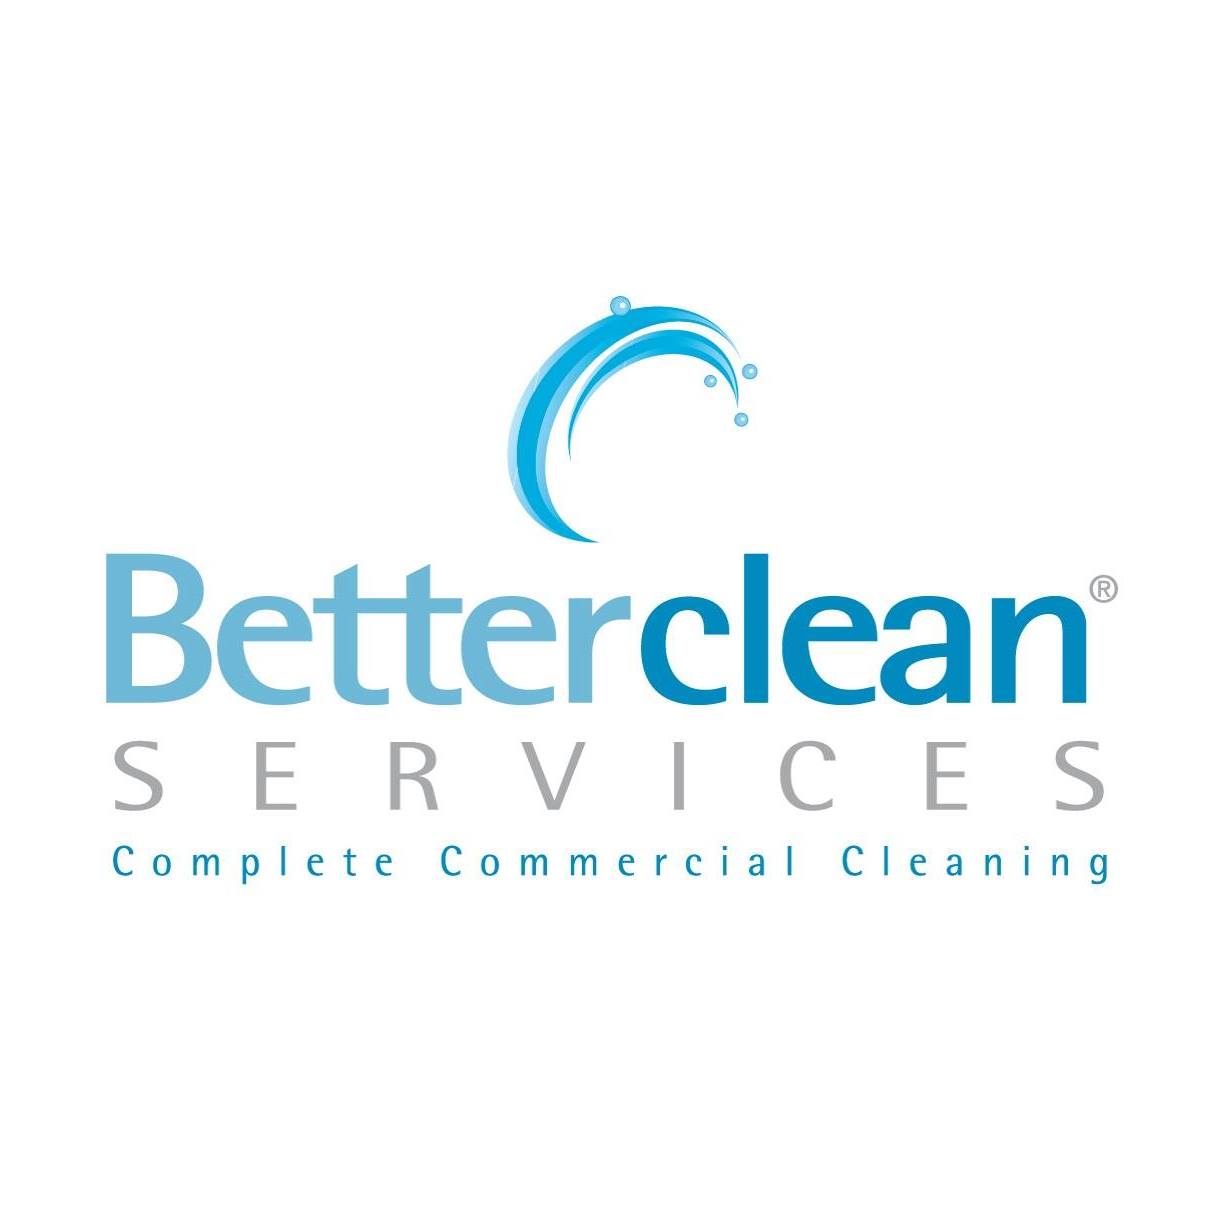 Betterclean Services - Providng a wide range of Cleaning Services across the UK